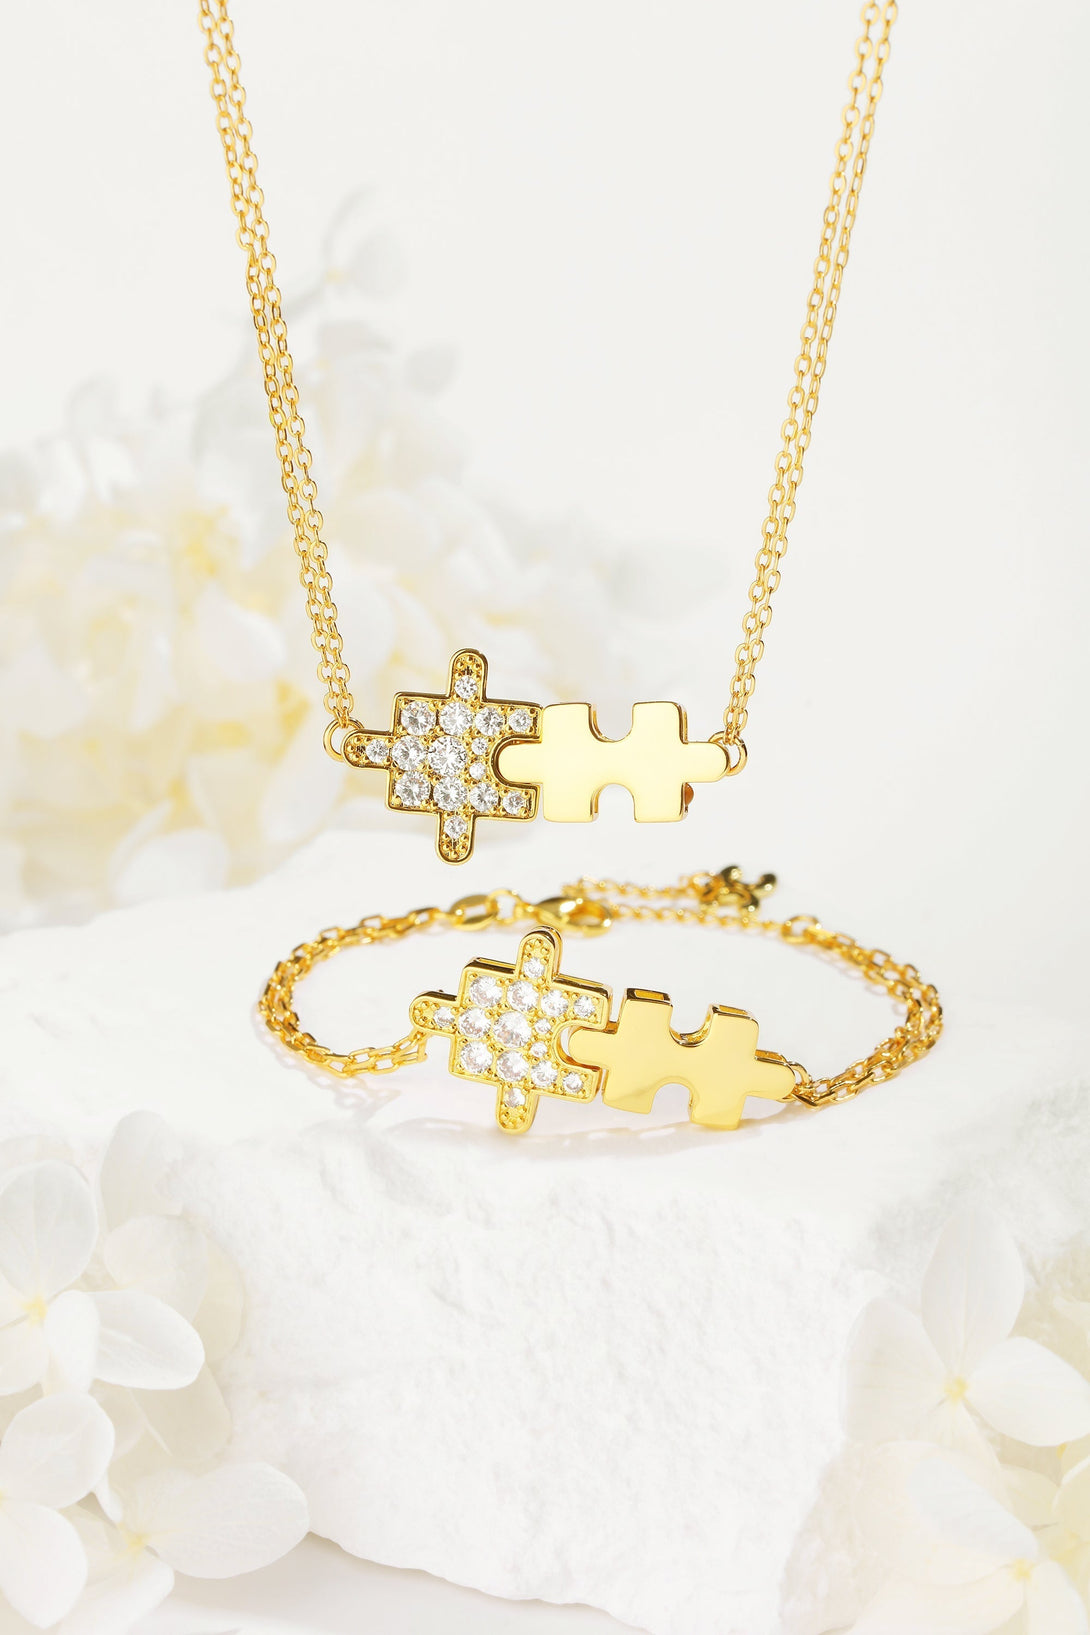 Gold Jigsaw Puzzle Necklace - Classicharms